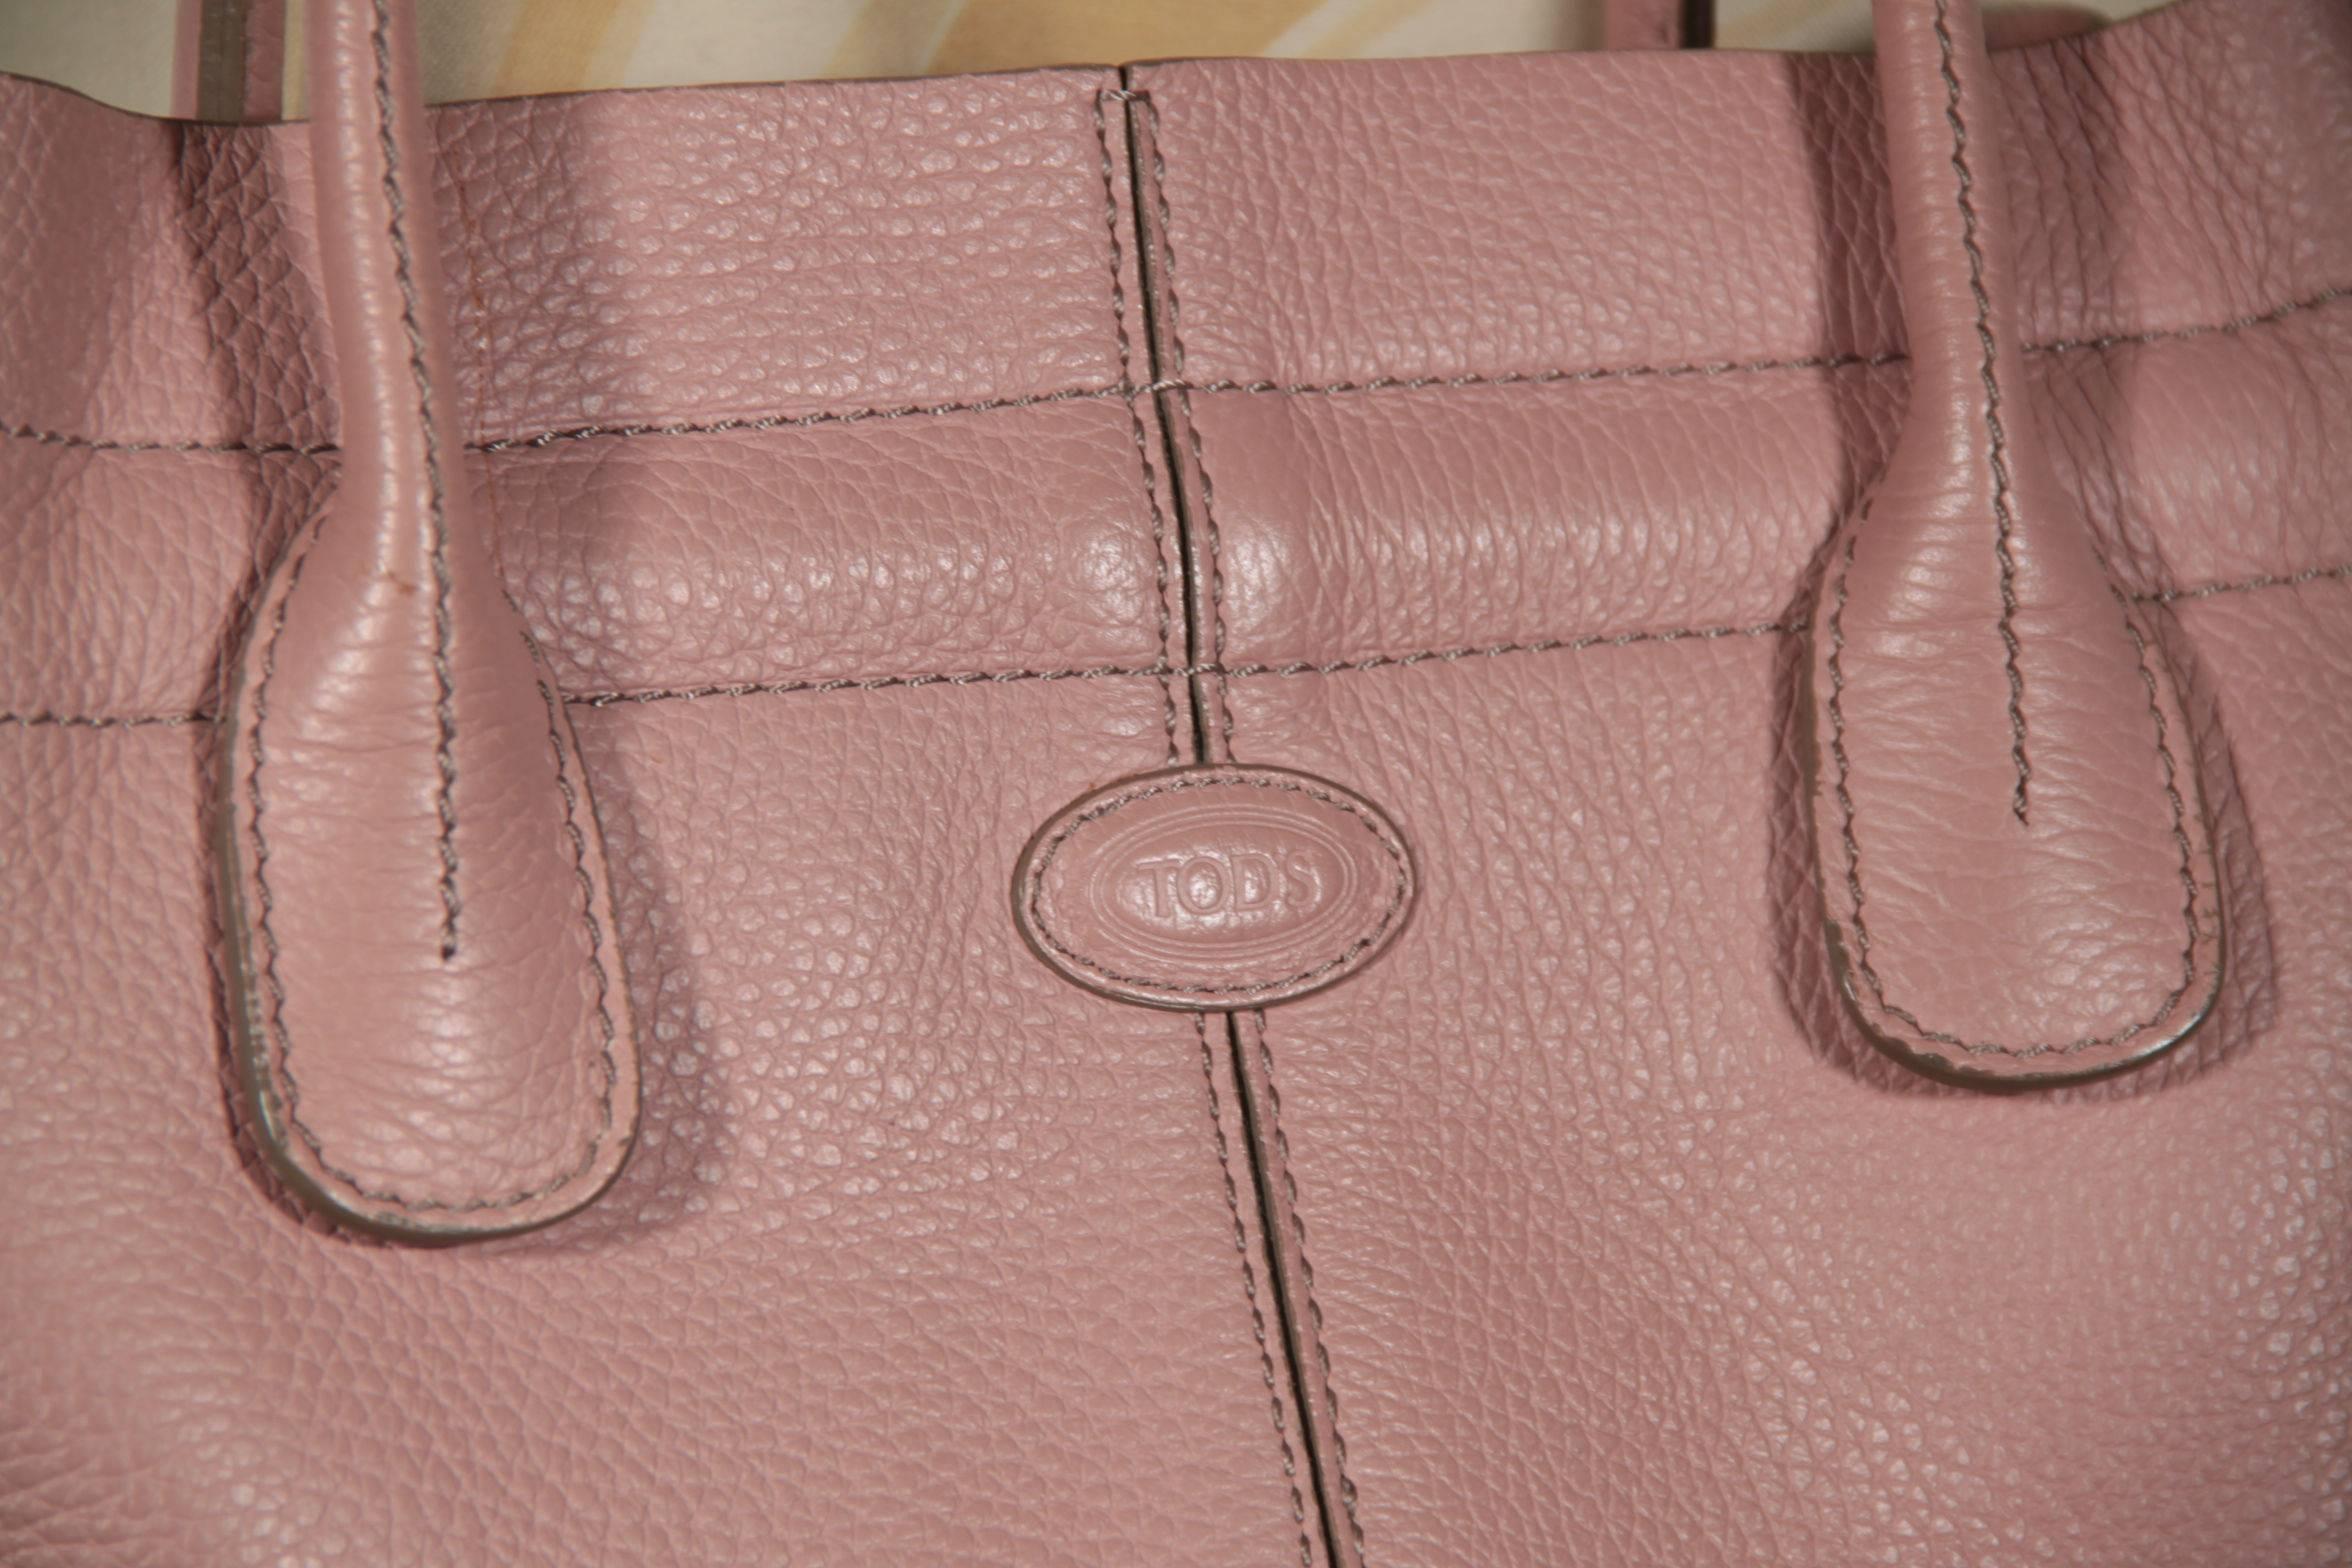 TOD'S Italian Pink Pebbled Leather Small NEW D BAG Handtasche TOTE Umhängetasche 2